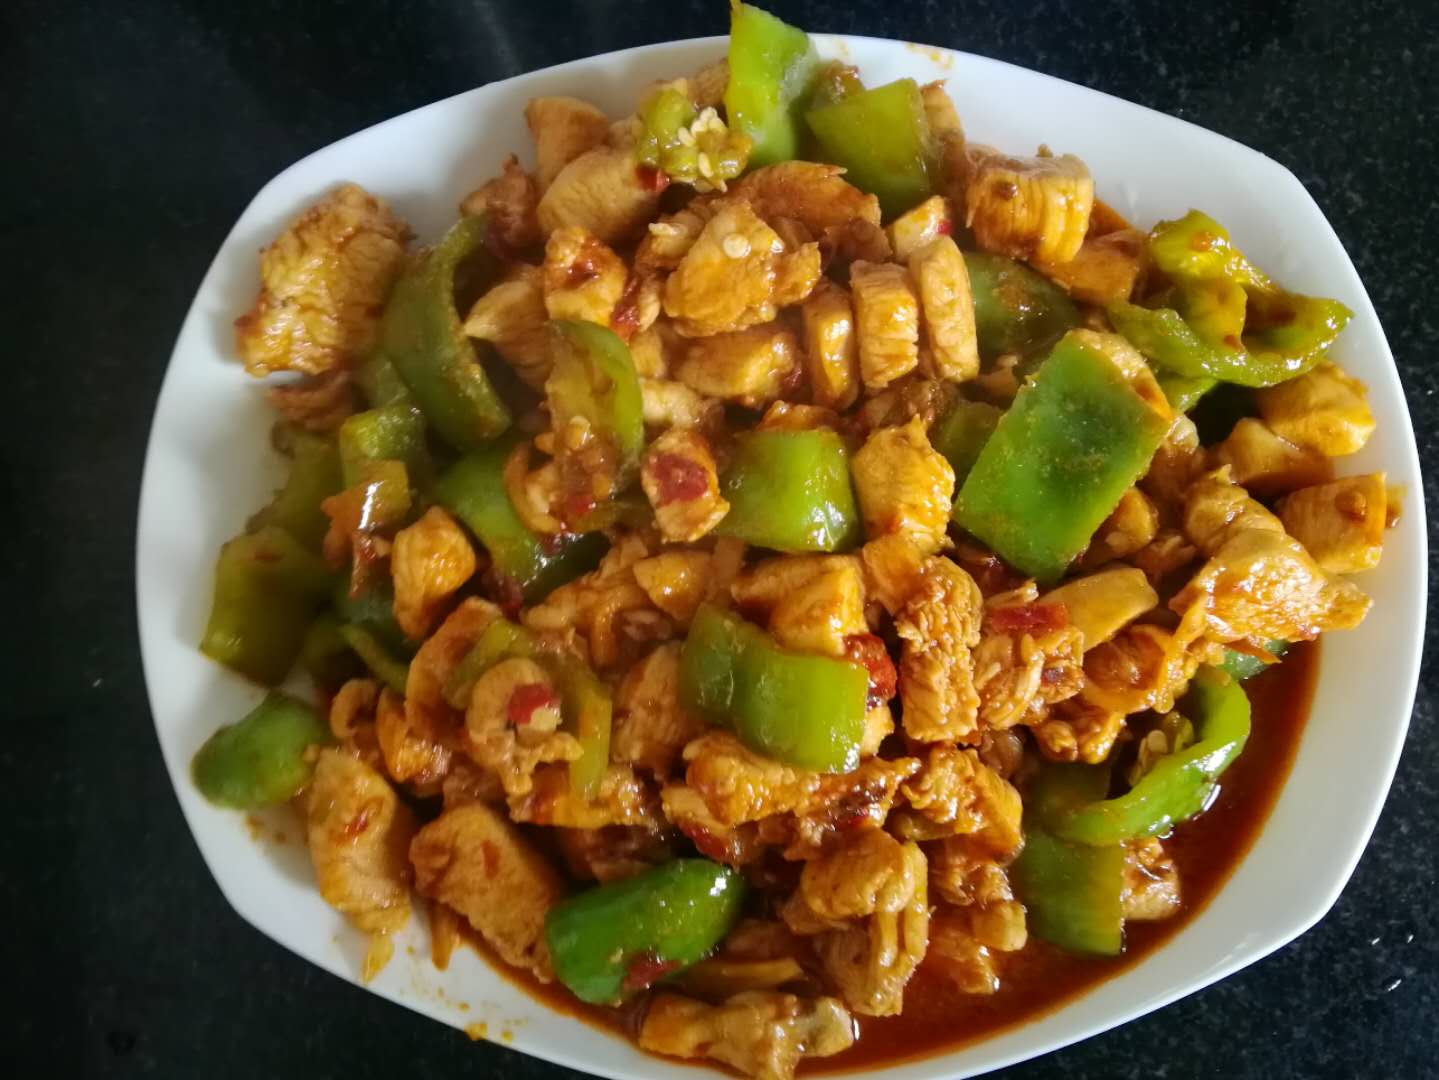 Diced_chicken_with_green_pepper___cooked.jpg